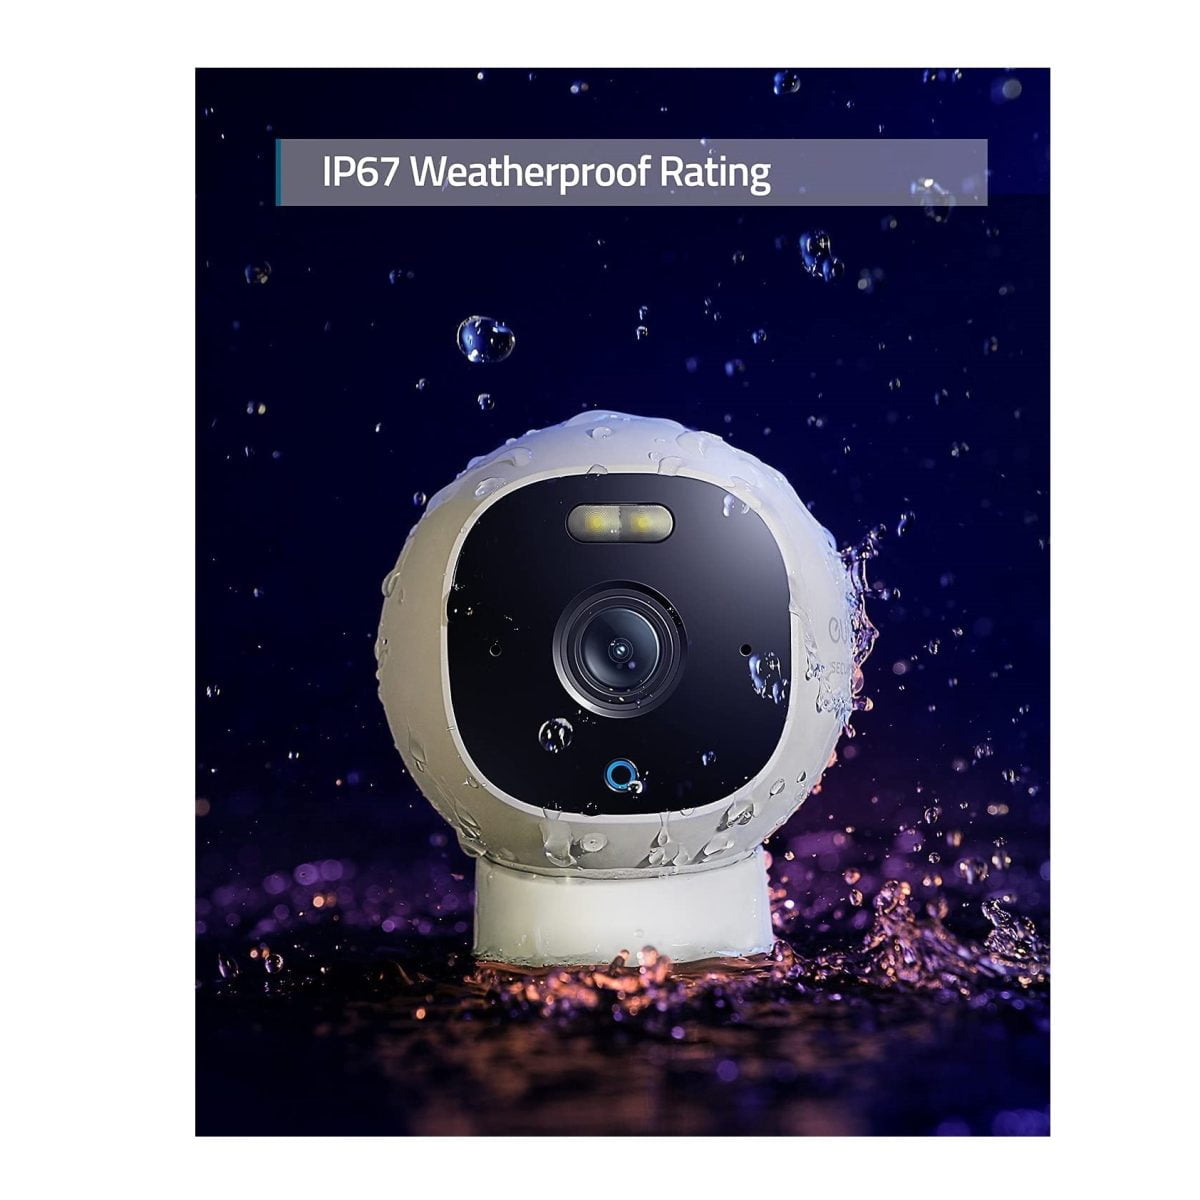 713V6Vmlpgs. Ac Sl1500 Eufy &Lt;H1&Gt;Eufy Outdoor Security Camera Spotlight Pro 2K 32Gb -T8441221 (Wired)&Lt;/H1&Gt; &Lt;Ul Class=&Quot;A-Unordered-List A-Vertical A-Spacing-Mini&Quot;&Gt; &Lt;Li&Gt;&Lt;Span Class=&Quot;A-List-Item&Quot;&Gt;Ultra-Clear 2K Resolution: View Any Real-Time Moment In Ultra-Clear 2K Resolution. The F2.0 Aperture Works To Produce Vivid Images From An Outdoor Security Camera That Gives You The Complete Picture.&Lt;/Span&Gt;&Lt;/Li&Gt; &Lt;Li&Gt;&Lt;Span Class=&Quot;A-List-Item&Quot;&Gt;Subscription-Free Security: Equipped With A 32Gb Microsd Card And On-Device Ai, Outdoorcam Offers Round-The-Clock Security That’s Ready To Use Out Of The Box.&Lt;/Span&Gt;&Lt;/Li&Gt; &Lt;Li&Gt;&Lt;Span Class=&Quot;A-List-Item&Quot;&Gt;Security Under The Spotlight: The Powerful Built-In Spotlight On The Outdoor Security Camera Illuminates The Surrounding Area When Relevant Motion Is Detected. It Also Ensures That You Can Keep An Eye On Any Spot In Full-Color, Even In Low Light.&Lt;/Span&Gt;&Lt;/Li&Gt; &Lt;Li&Gt;&Lt;Span Class=&Quot;A-List-Item&Quot;&Gt;Flexible Installation: The Magnetic Mount And 20-Foot Cable Allows You To Easily Install The Outdoor Security Camera Anywhere On Your Property.&Lt;/Span&Gt;&Lt;/Li&Gt; &Lt;Li&Gt;&Lt;Span Class=&Quot;A-List-Item&Quot;&Gt;Powerful On-Device Ai: Data Is Processed On-Board The Camera, Resulting In Faster Decision Making And Fewer Errors. The End Result Is More Accurate Detection And Fewer False Alerts.&Lt;/Span&Gt;&Lt;/Li&Gt; &Lt;/Ul&Gt; Security Camera Eufy Outdoor Security Camera Spotlight Pro 2K 32Gb Wired